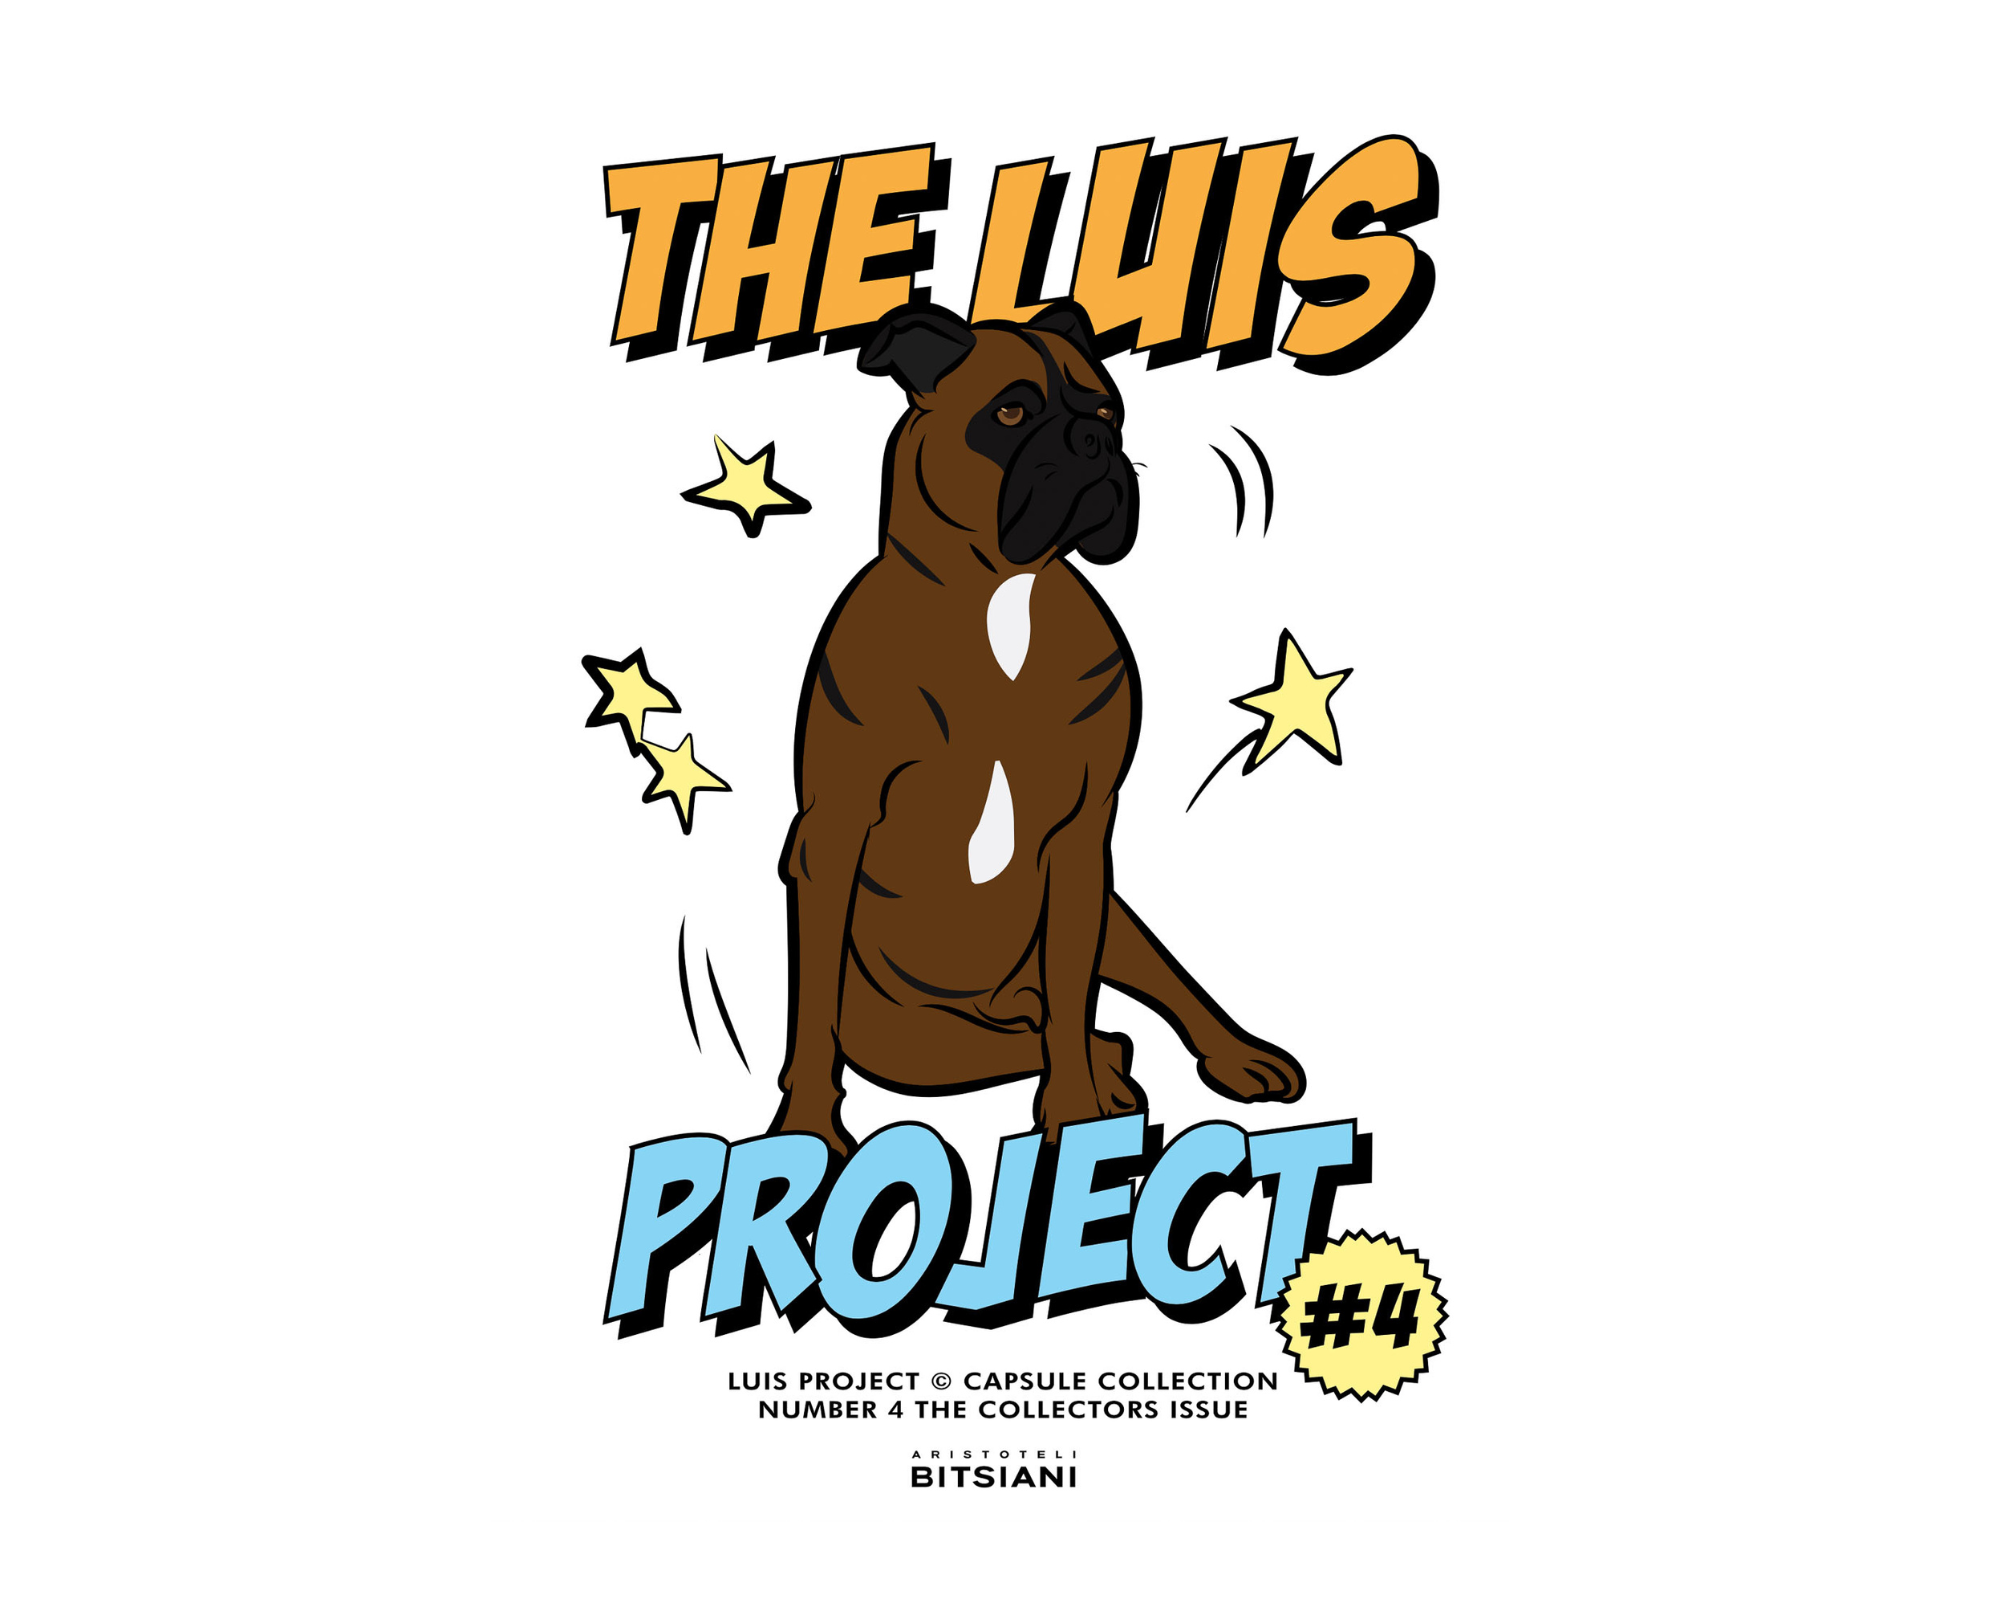 LUIS PROJECT